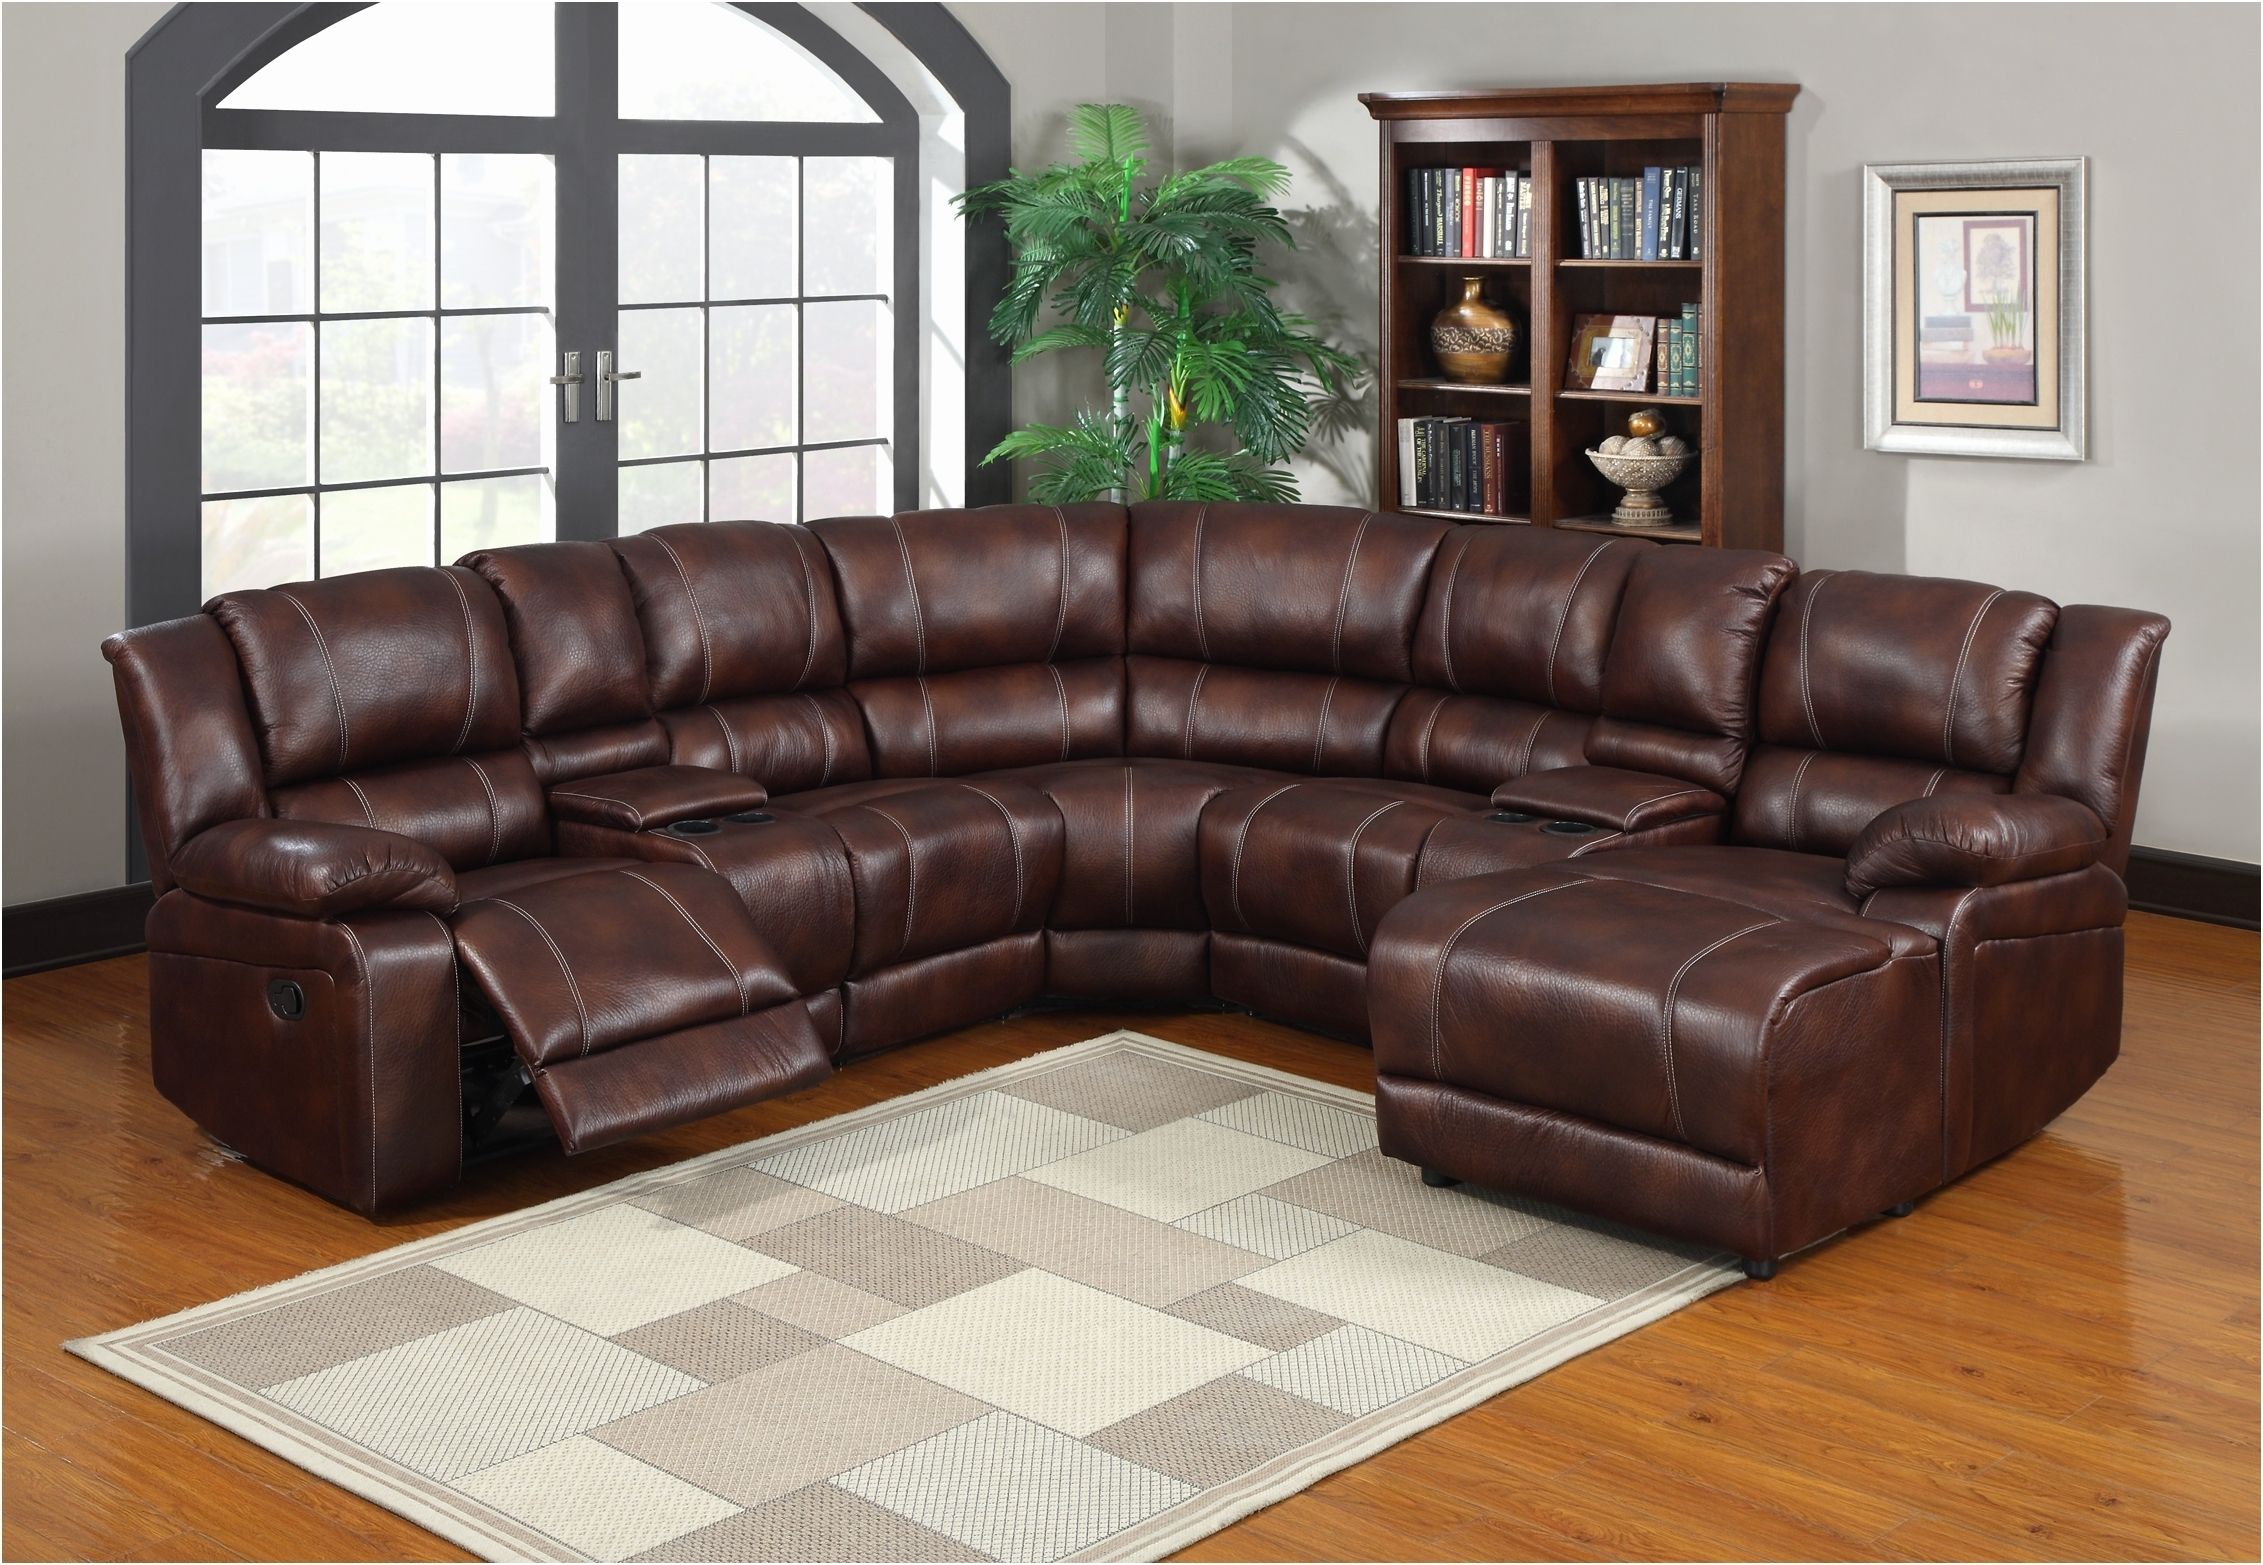 Sectional Sofas With Recliners Leather Throughout Favorite Sofa : Leather Sectional Sofas With Recliners Fresh Sectional (View 9 of 20)